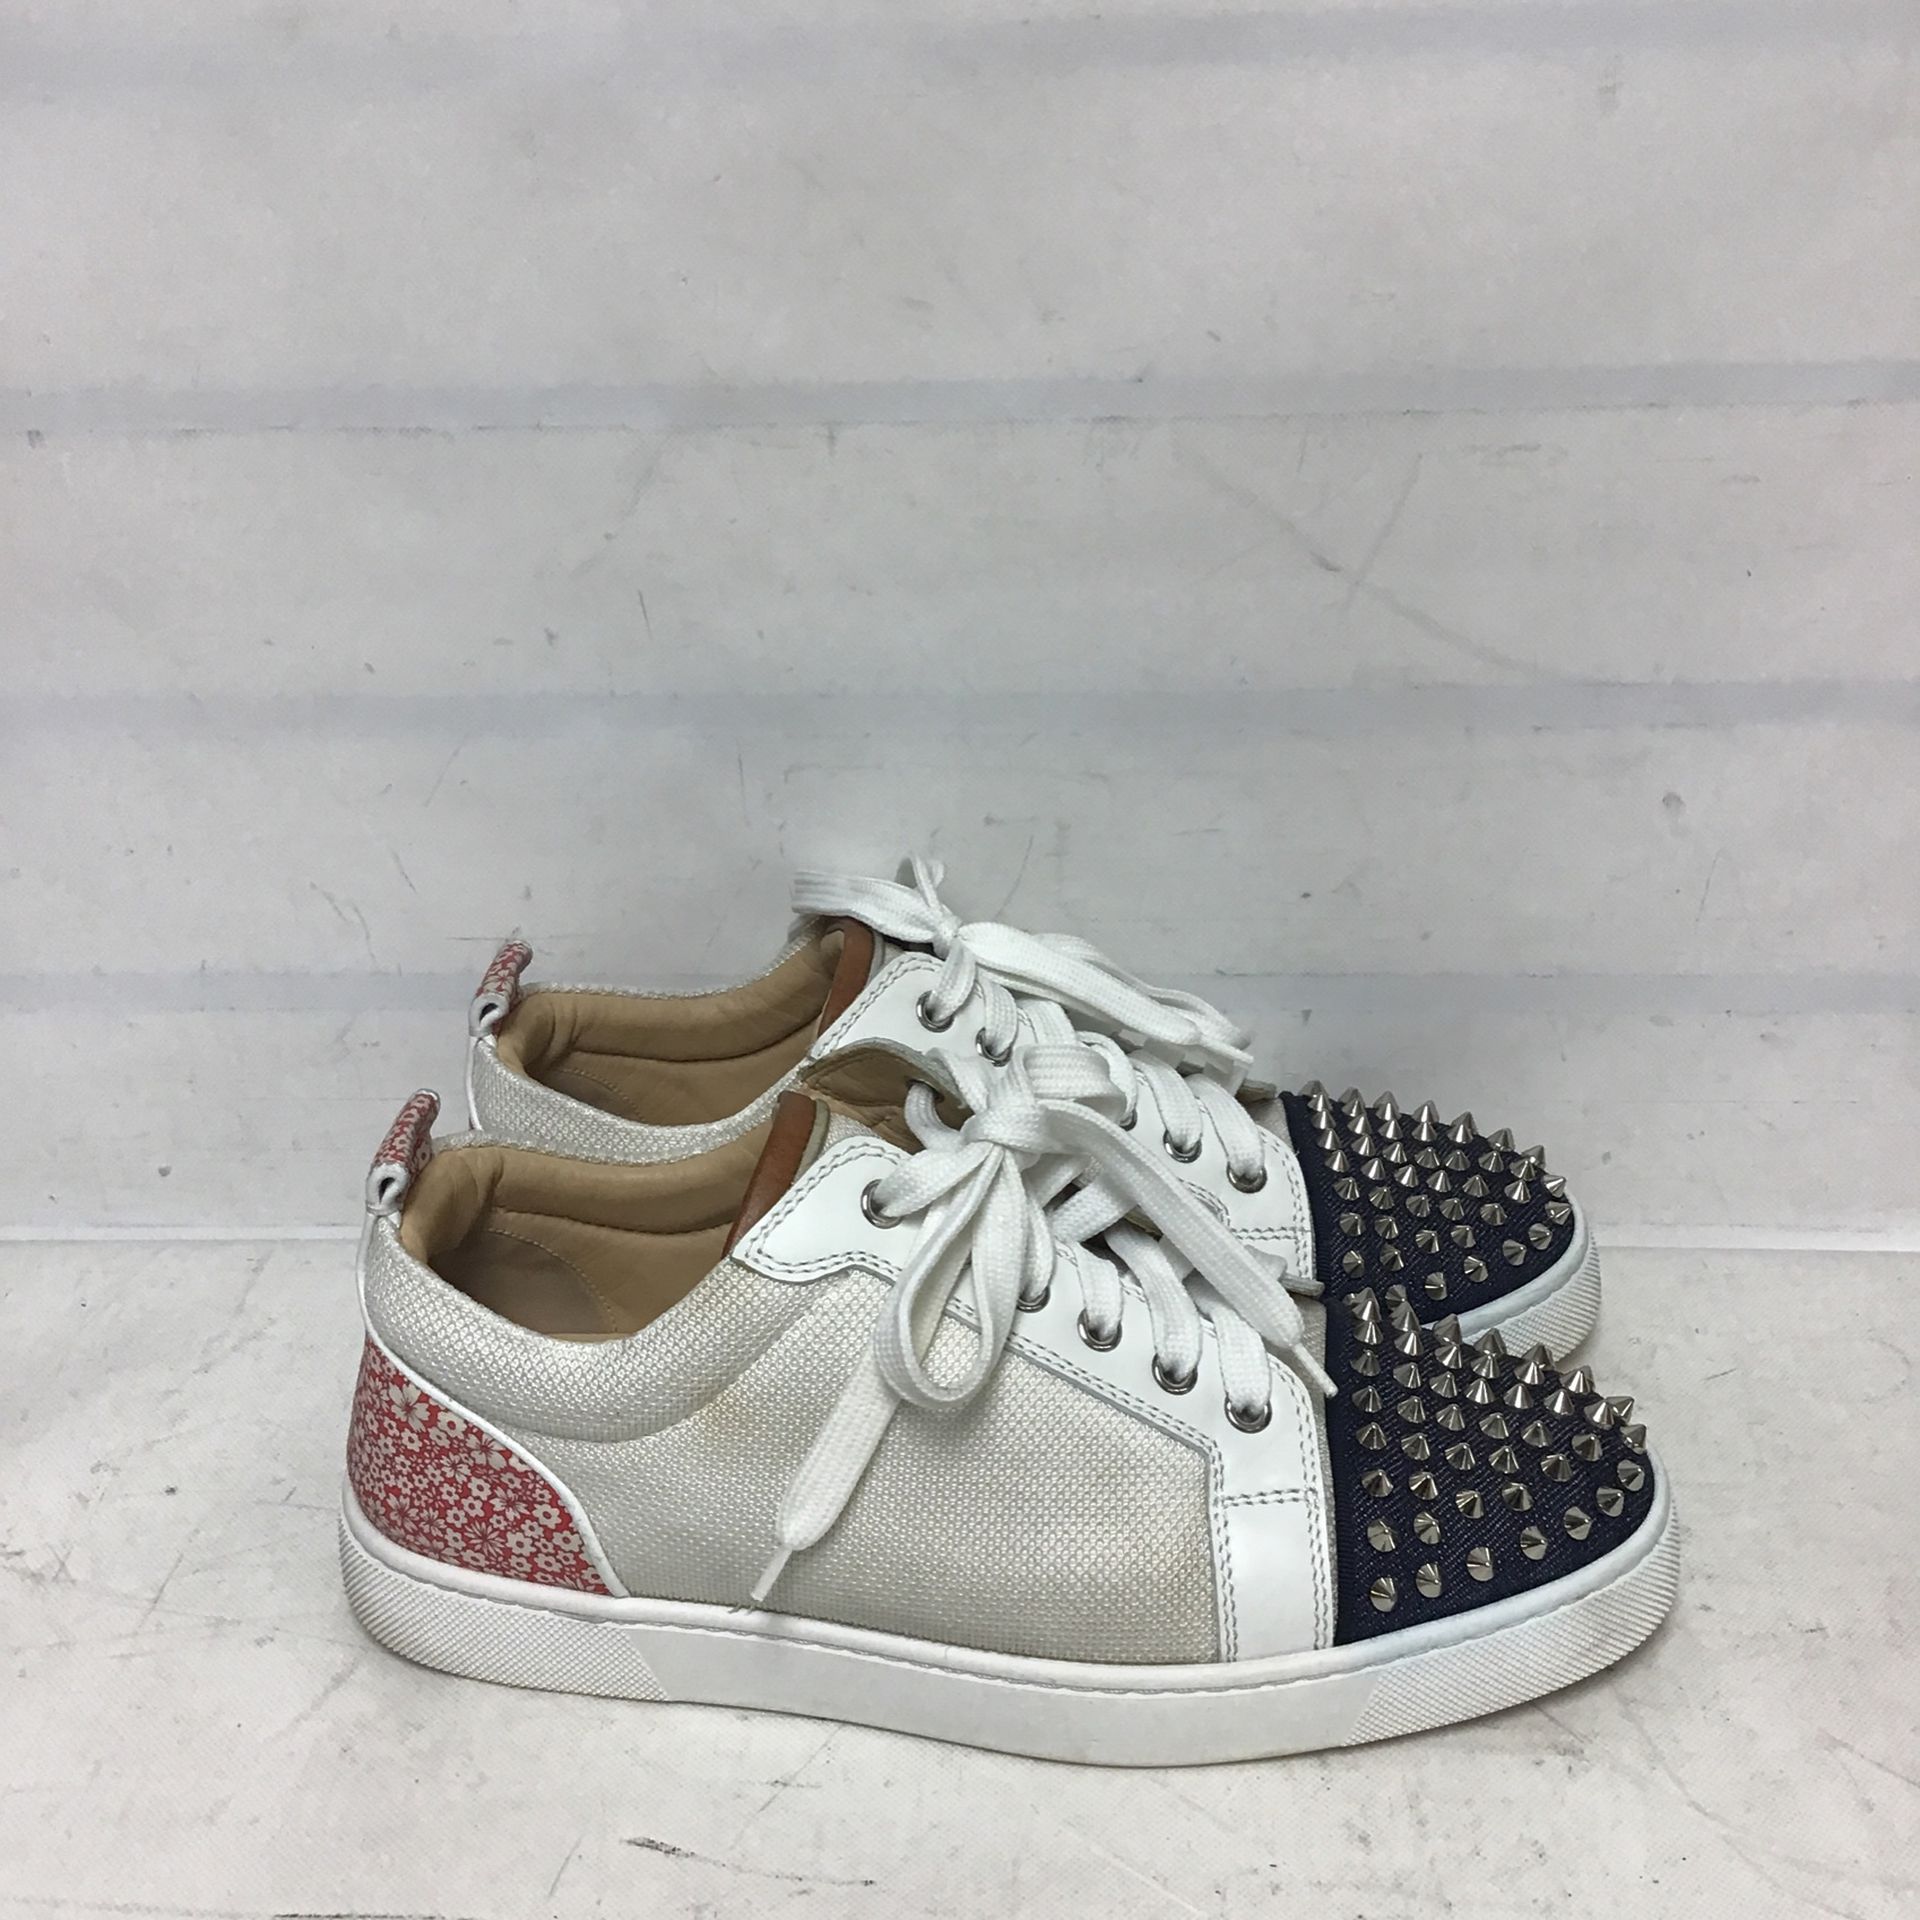 Christian Louboutin Spikes Flat Sneakers EU 40.5/ US No Box for Sale in Pompano Beach, FL - OfferUp